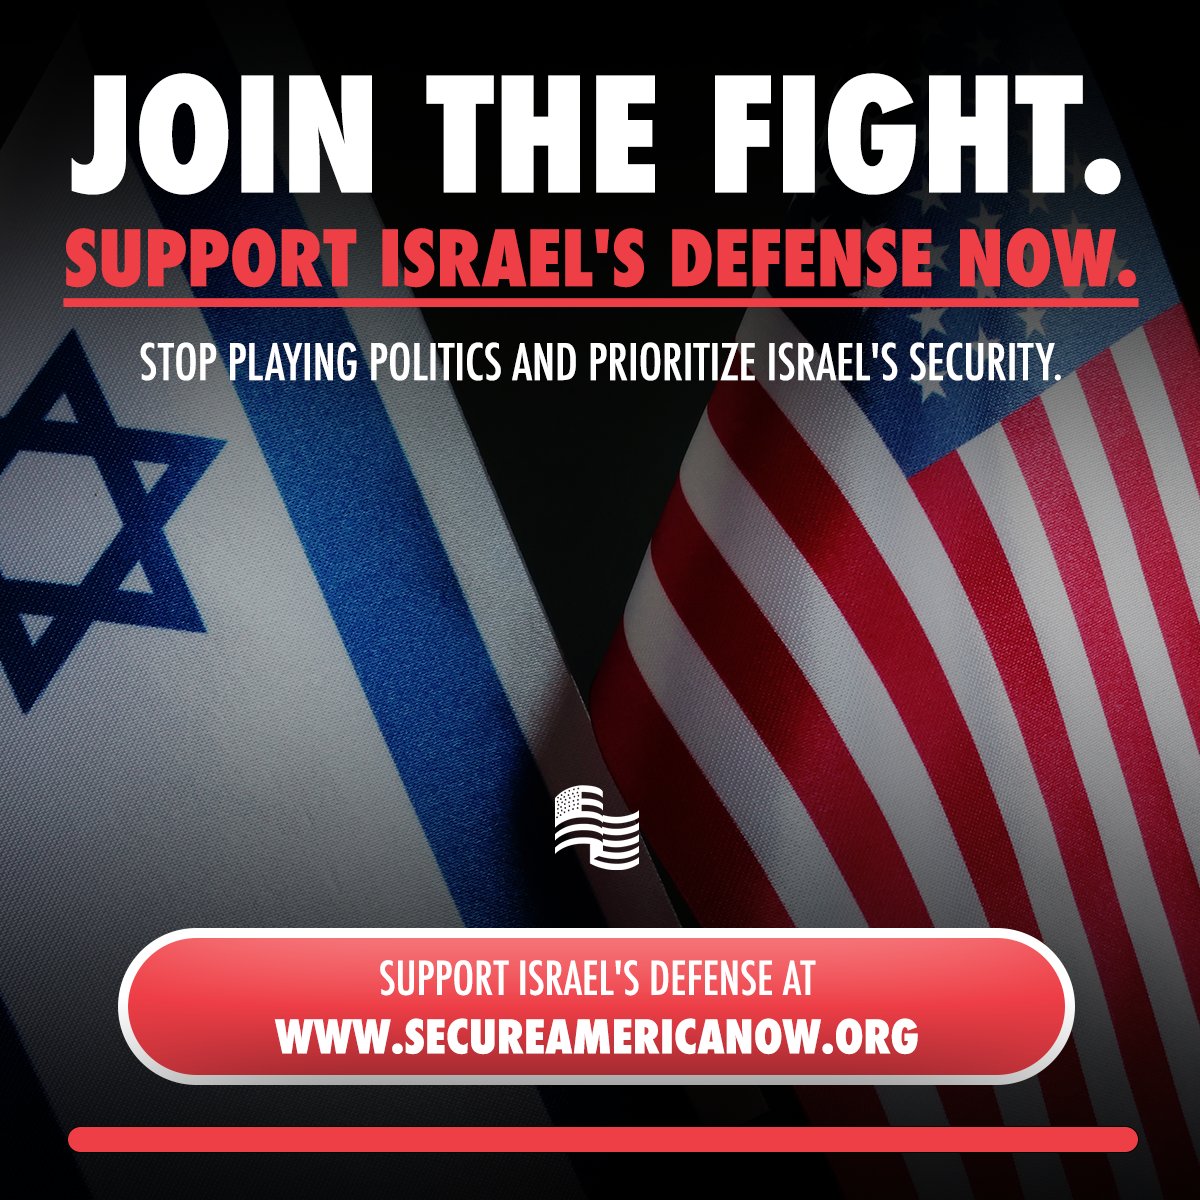 🇺🇸🇮🇱 BREAKING: Stand with Israel and stop the political games! The decision to withhold JDAMs is a dangerous maneuver. Israel needs our unwavering support to combat terrorism, not to be used as a political pawn. Terrorism knows no borders, and unity is crucial in this fight